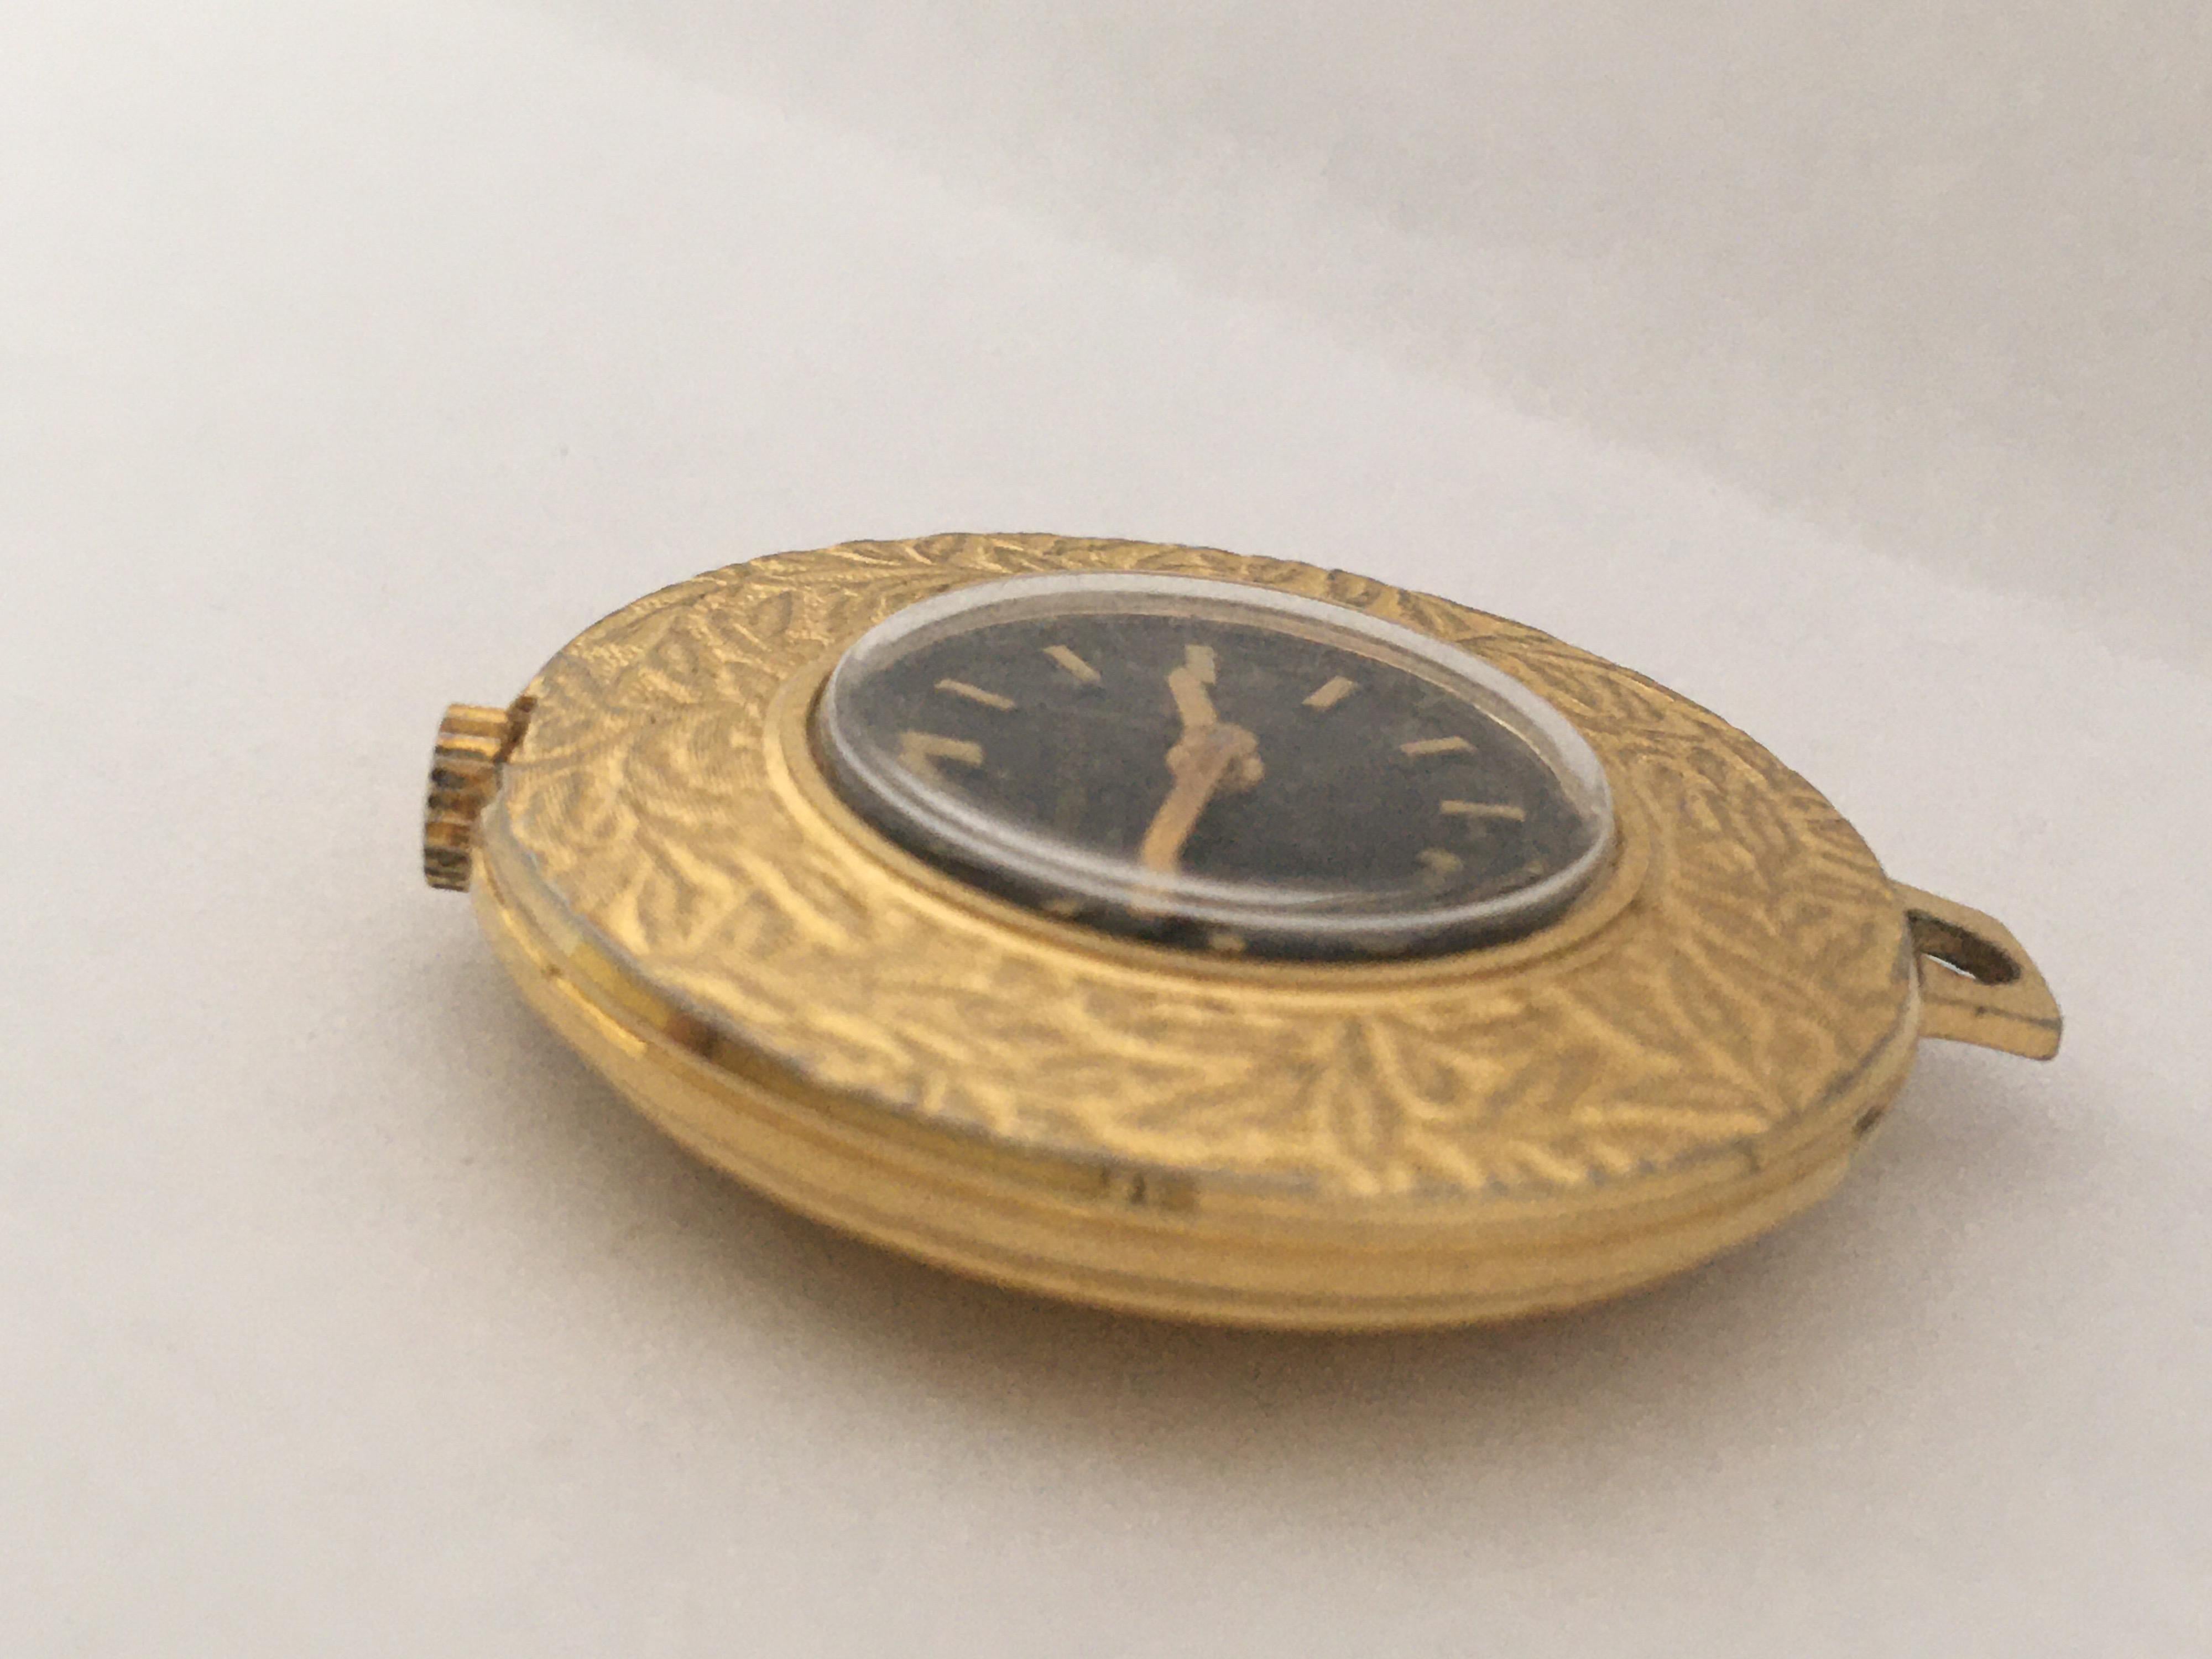 Vintage Gold-Plated Ingersoll Manual Winding Pendant Watch 1